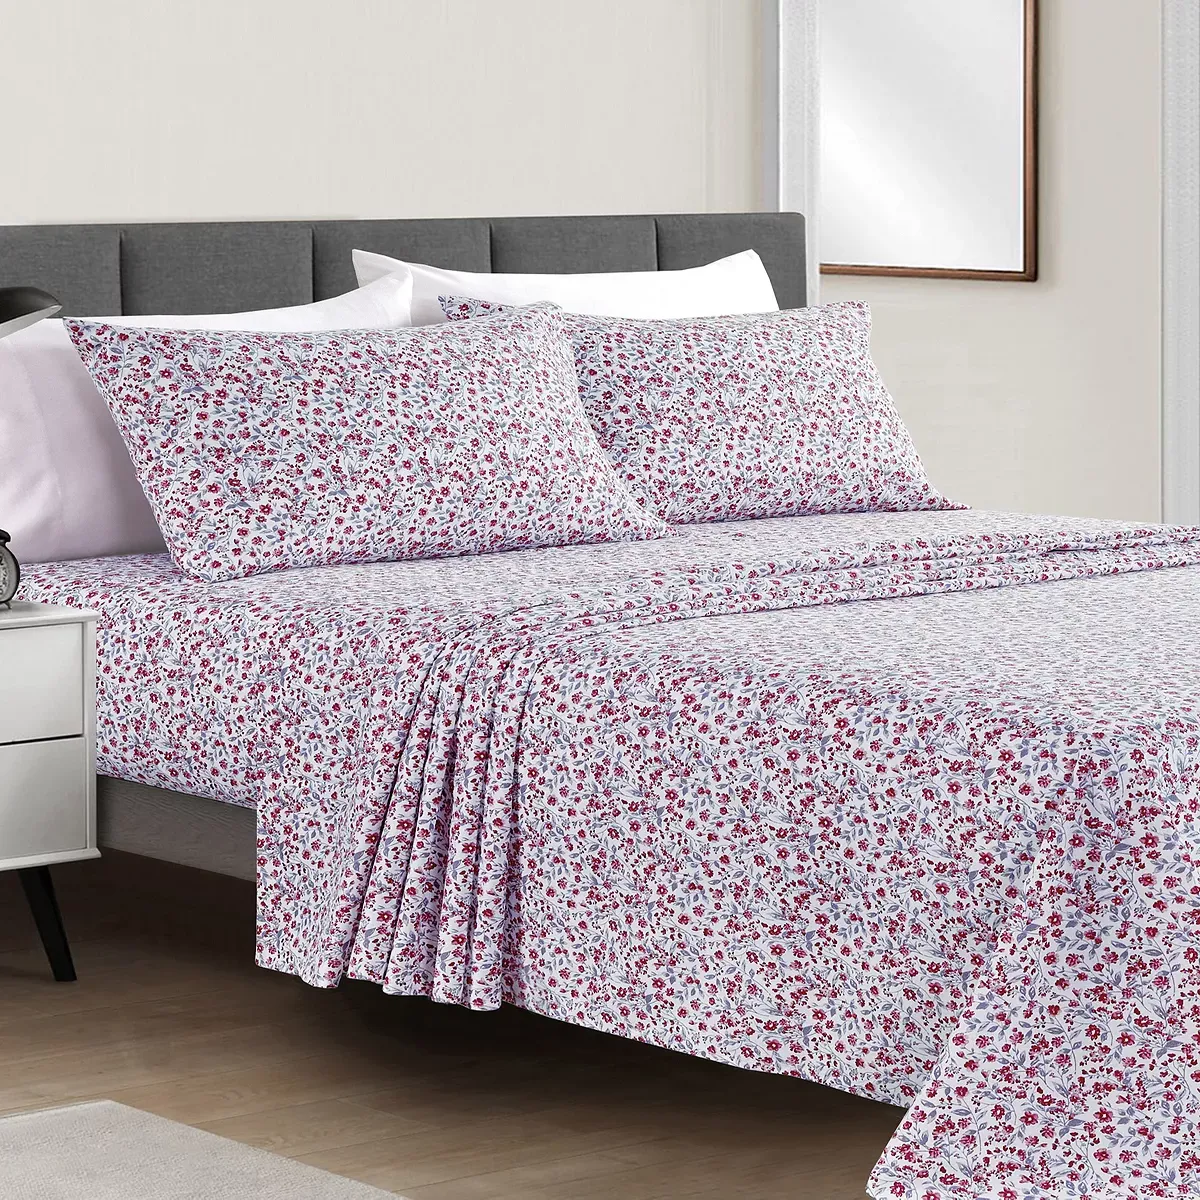 Floral patterned bedding set including fitted sheet, flat sheet, and pillowcases on a bed.